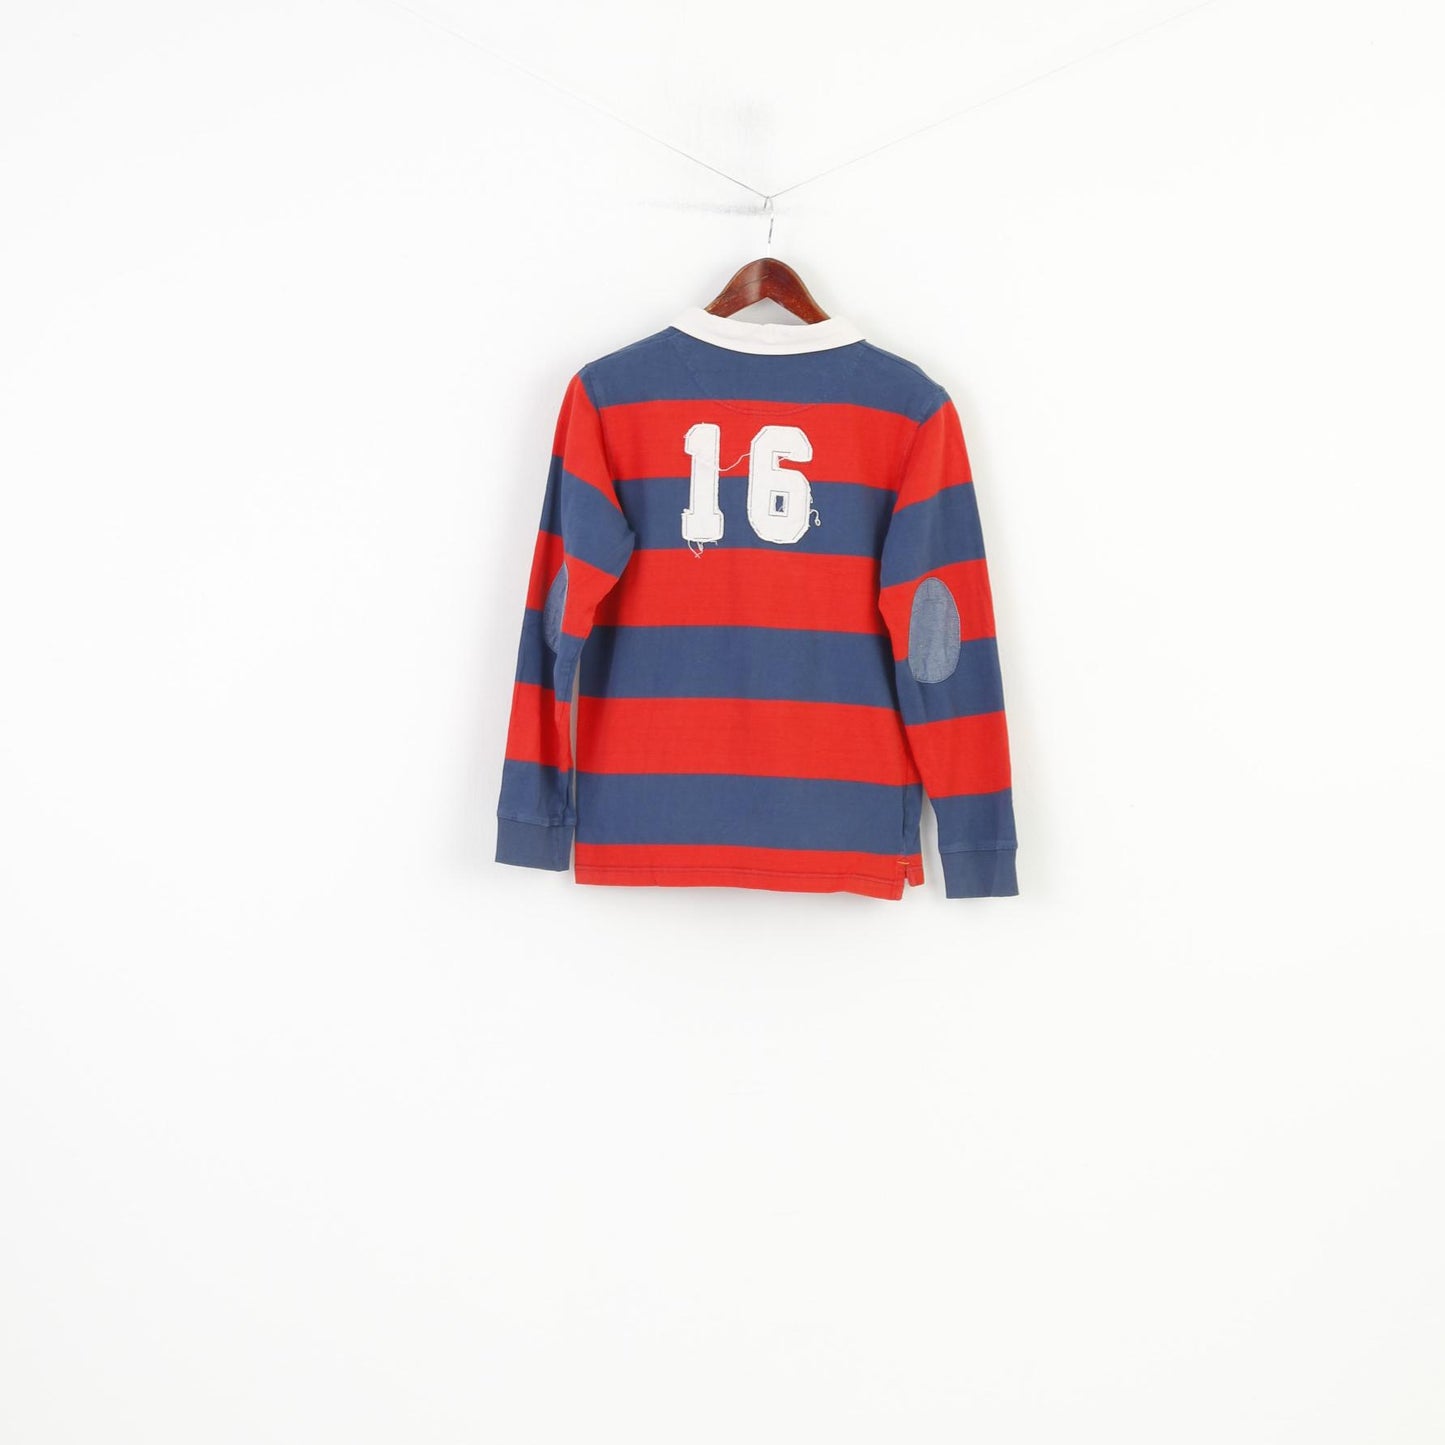 Kids By Lindex Boys 158 Polo Shirt Long Sleeve Striped Cotton Navy Red Vancouver University  Top